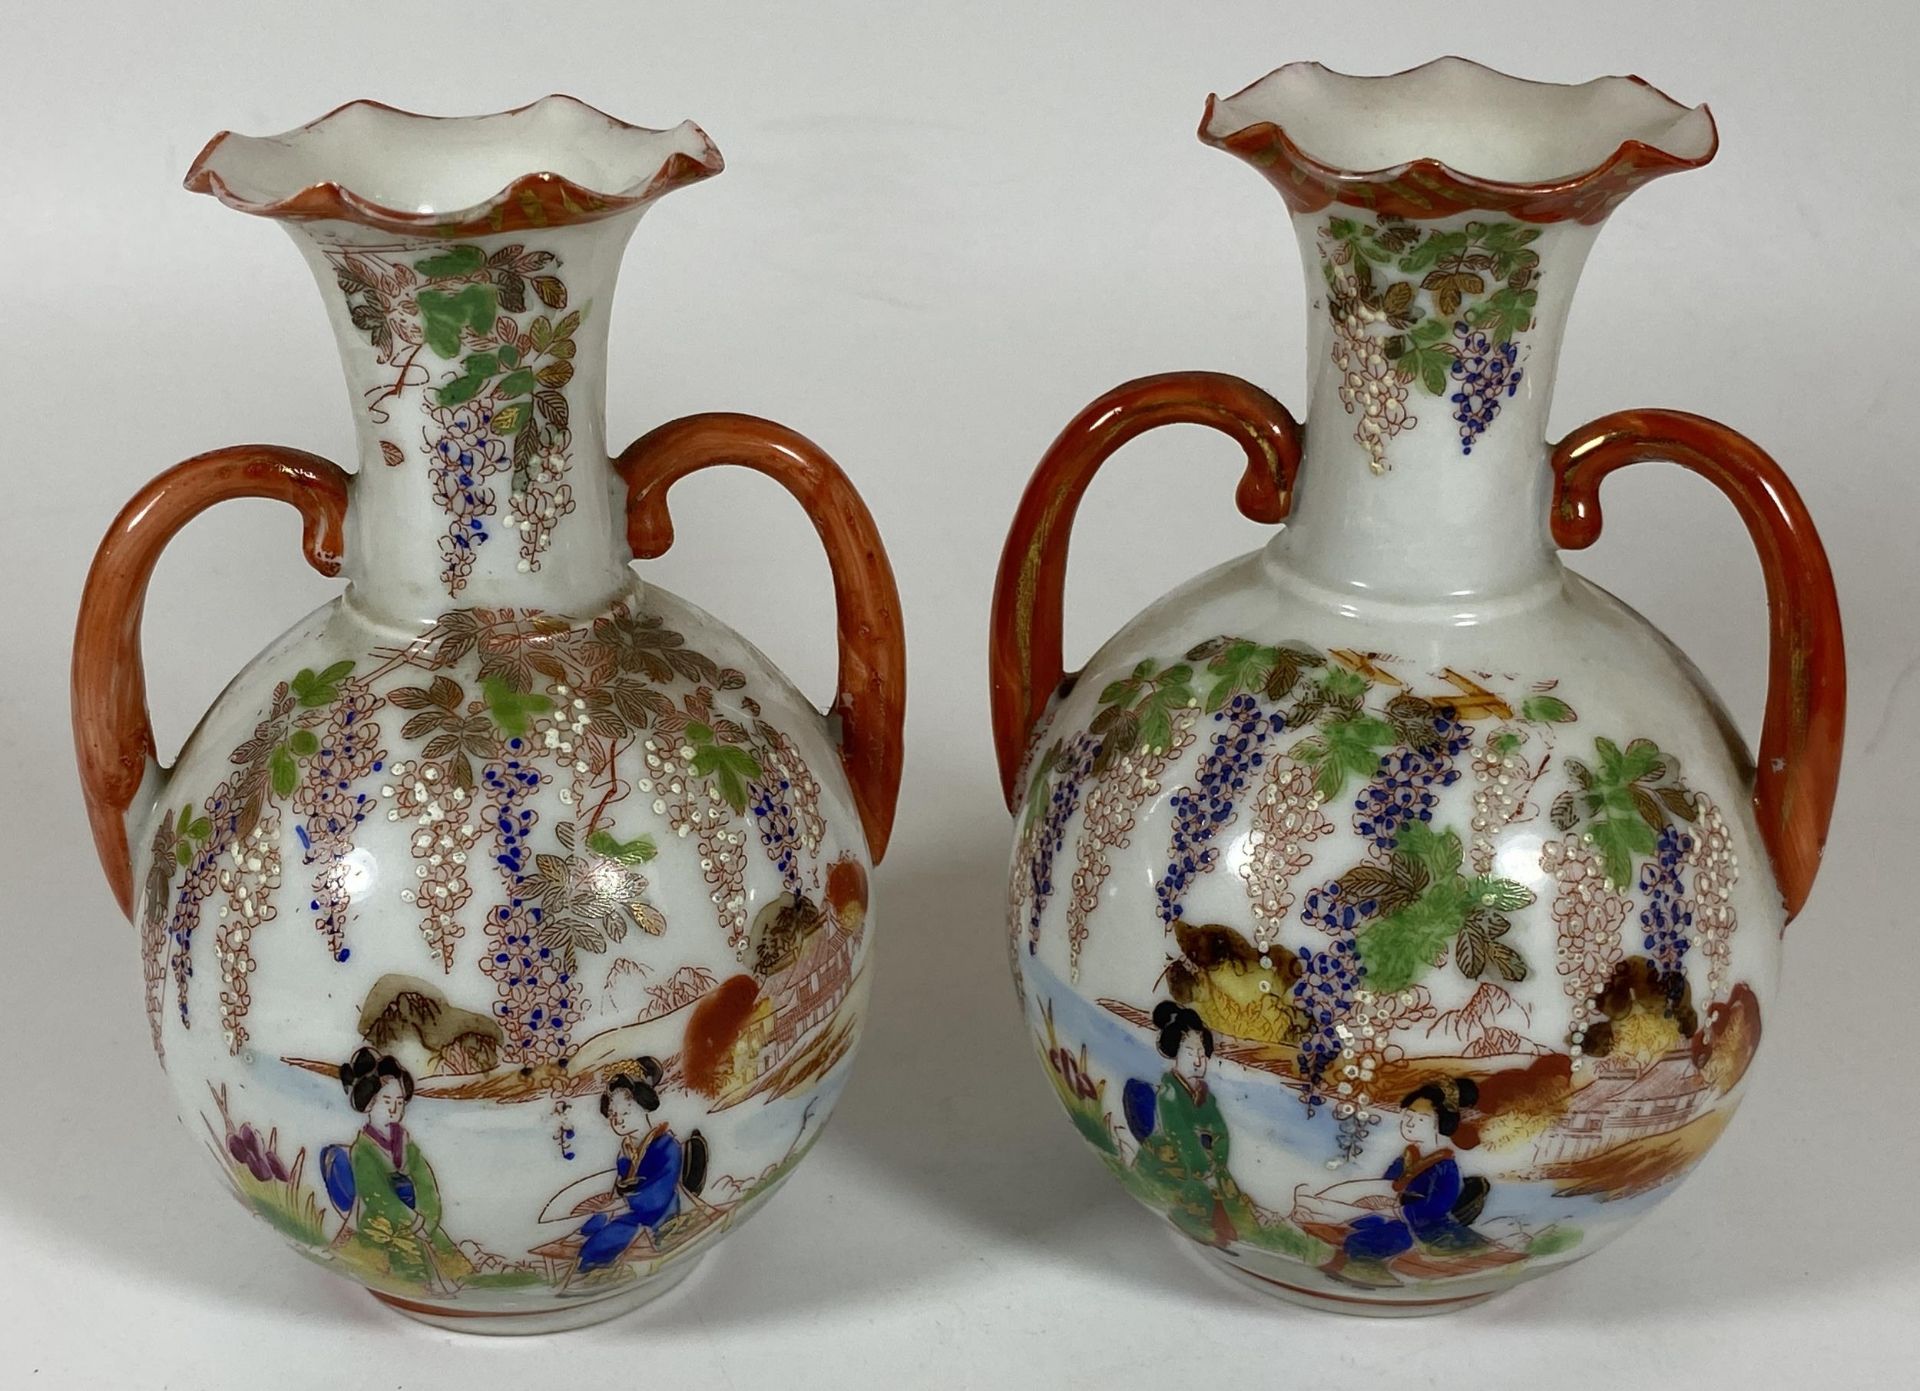 A PAIR OF JAPANESE TWIN HANDLED PORCELAIN VASES WITH LAKESIDE SCENE, HEIGHT 14CM